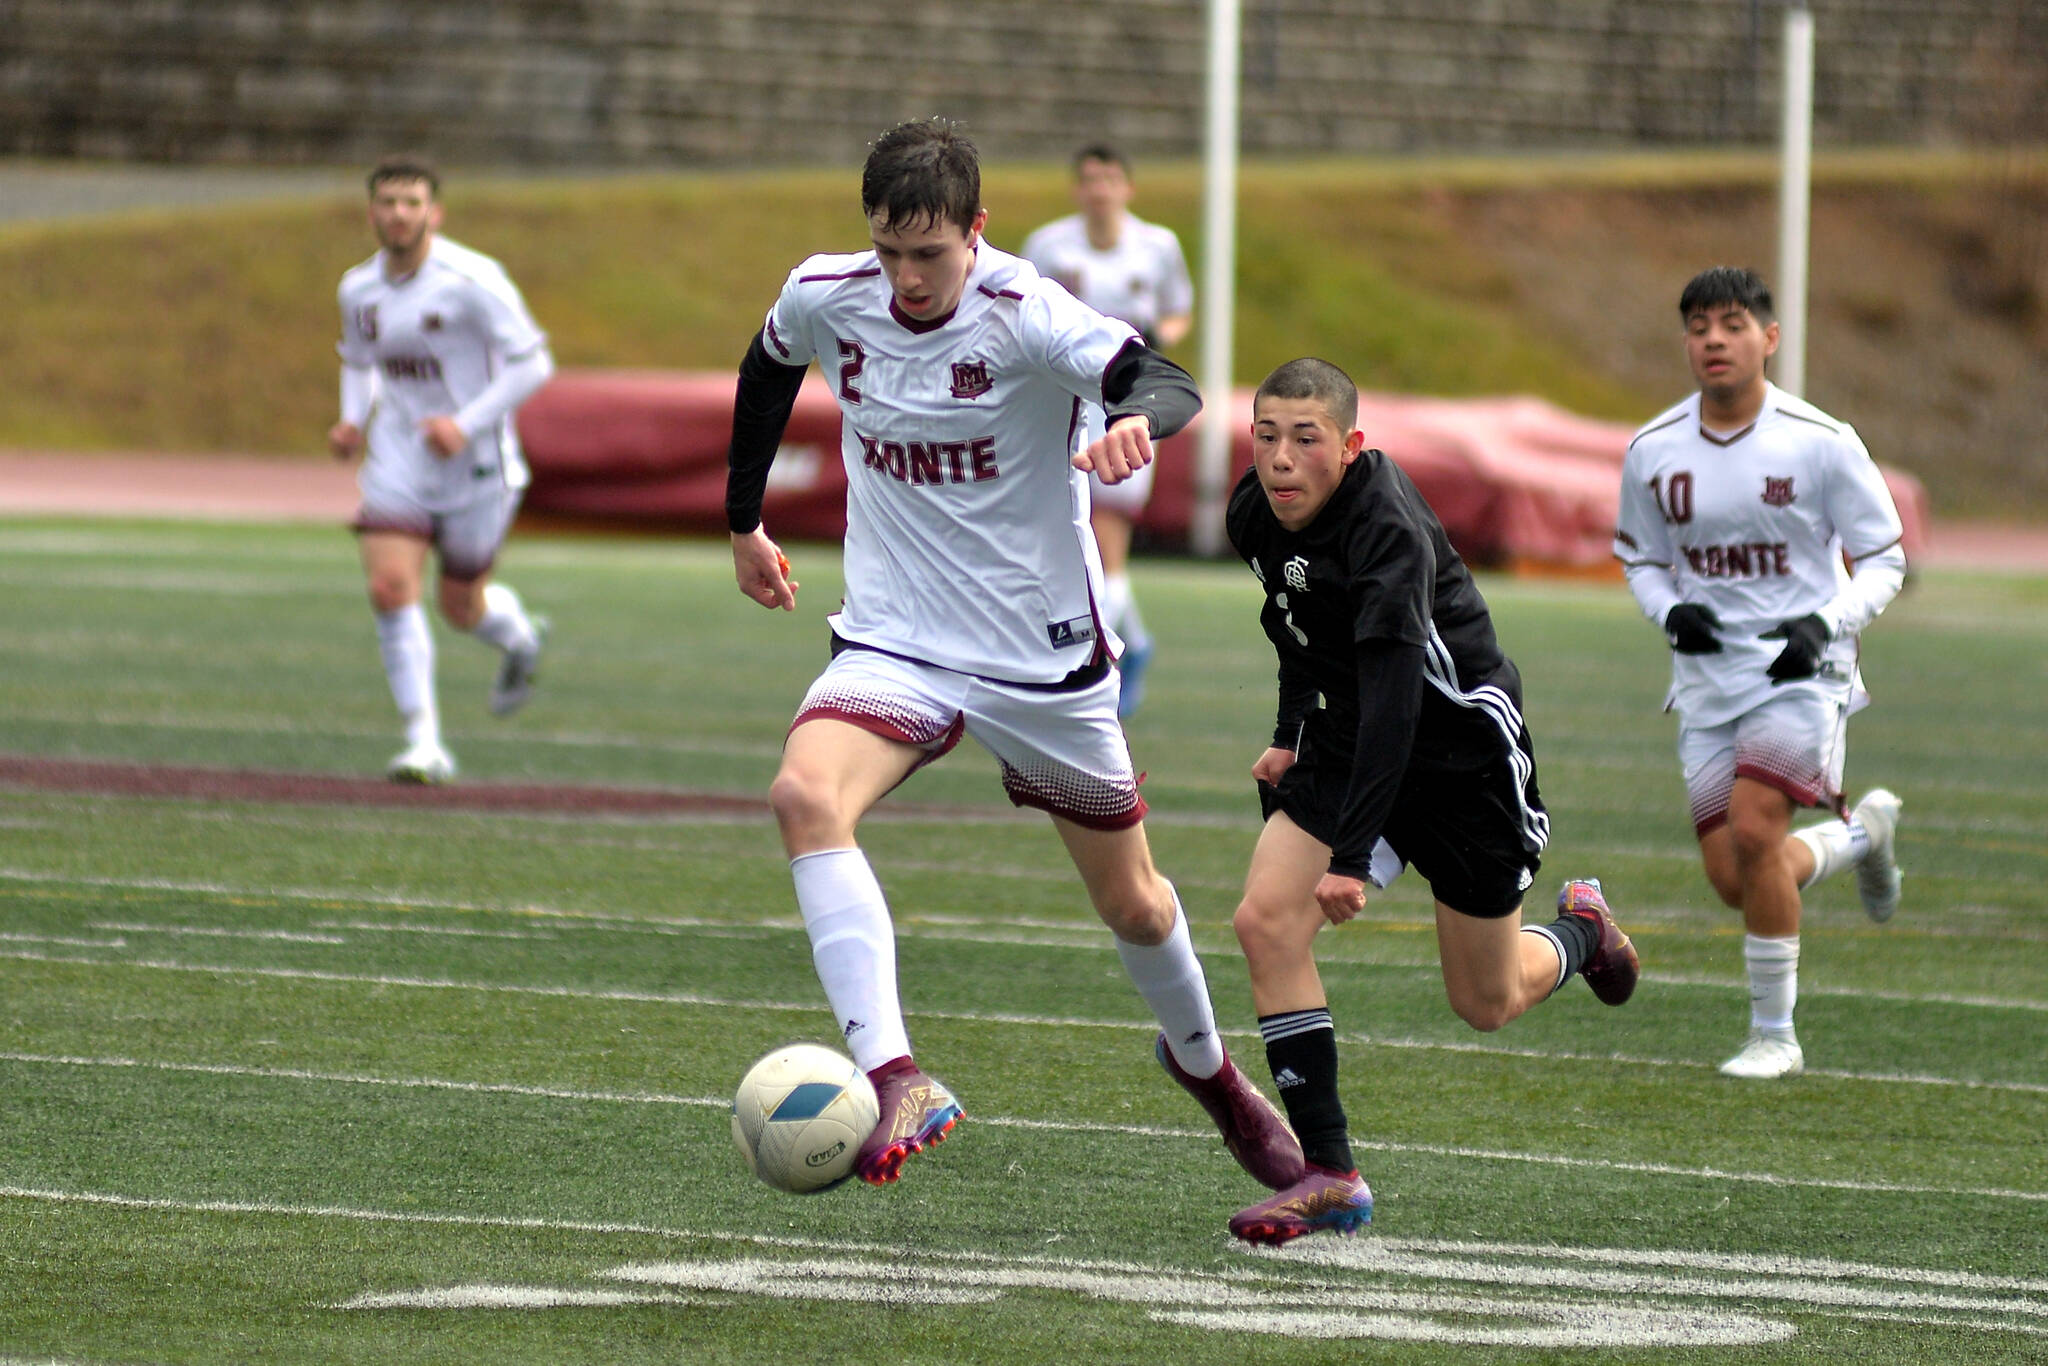 RYAN SPARKS | THE DAILY WORLD Montesano’s Luke Clements (2) gains possession through the midfield during the Bulldogs’ 2-1 win over Royal on Saturday in Montesano.